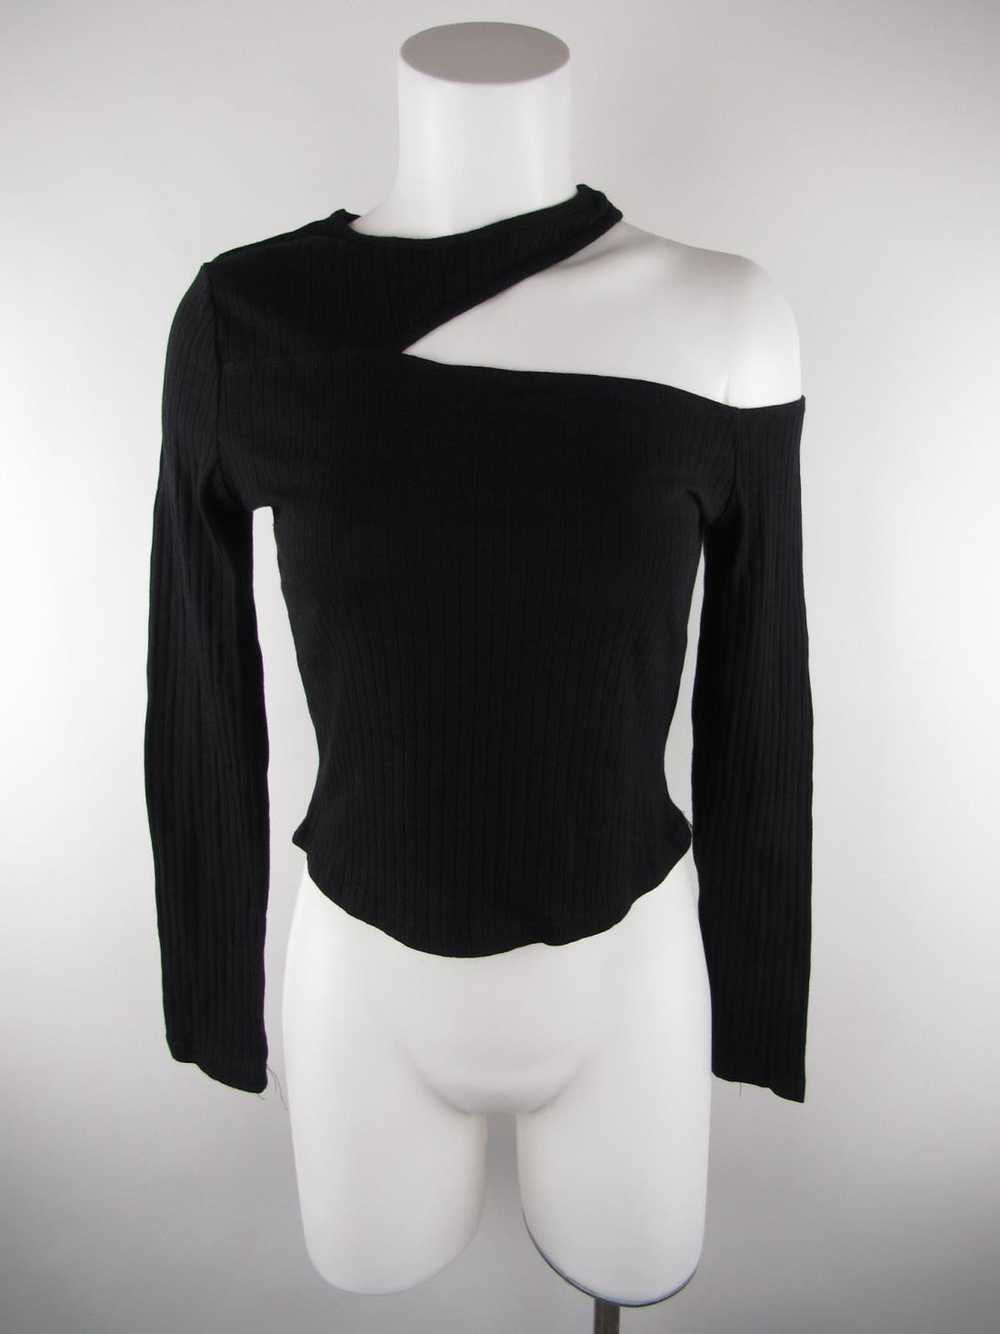 SheIn Spanex Black Size XS - $12 - From bell